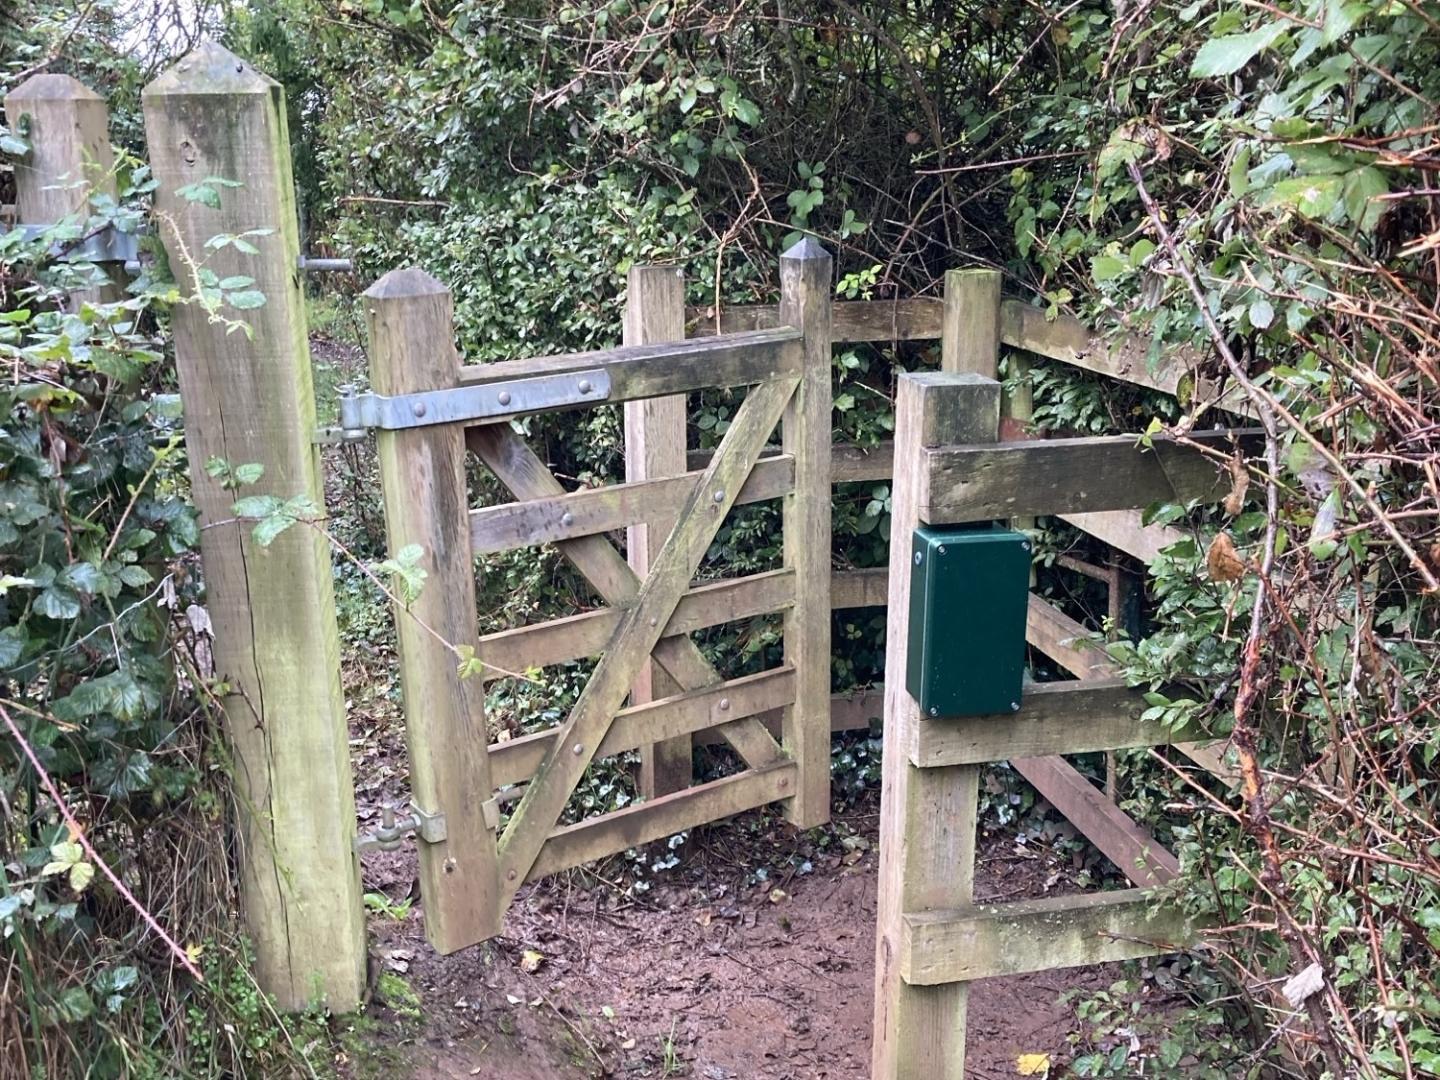 A photograph of a gate on a Public Rights of Way with a green box fixed to the post